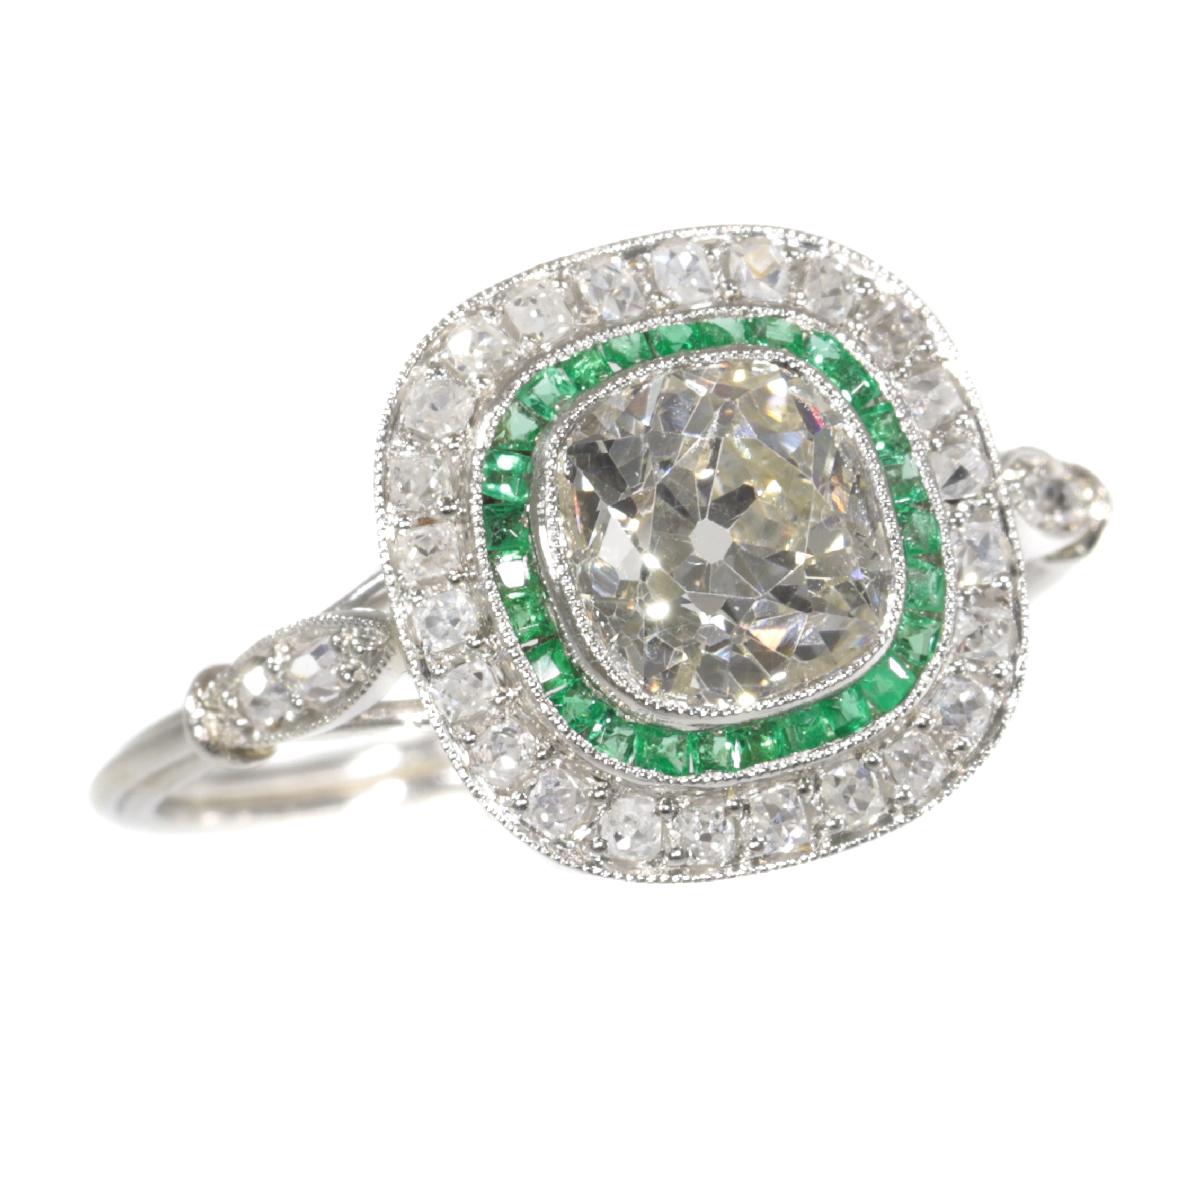 Vintage Art Deco Style Platinum Diamond and Emerald Engagement Ring, 1930s For Sale 5